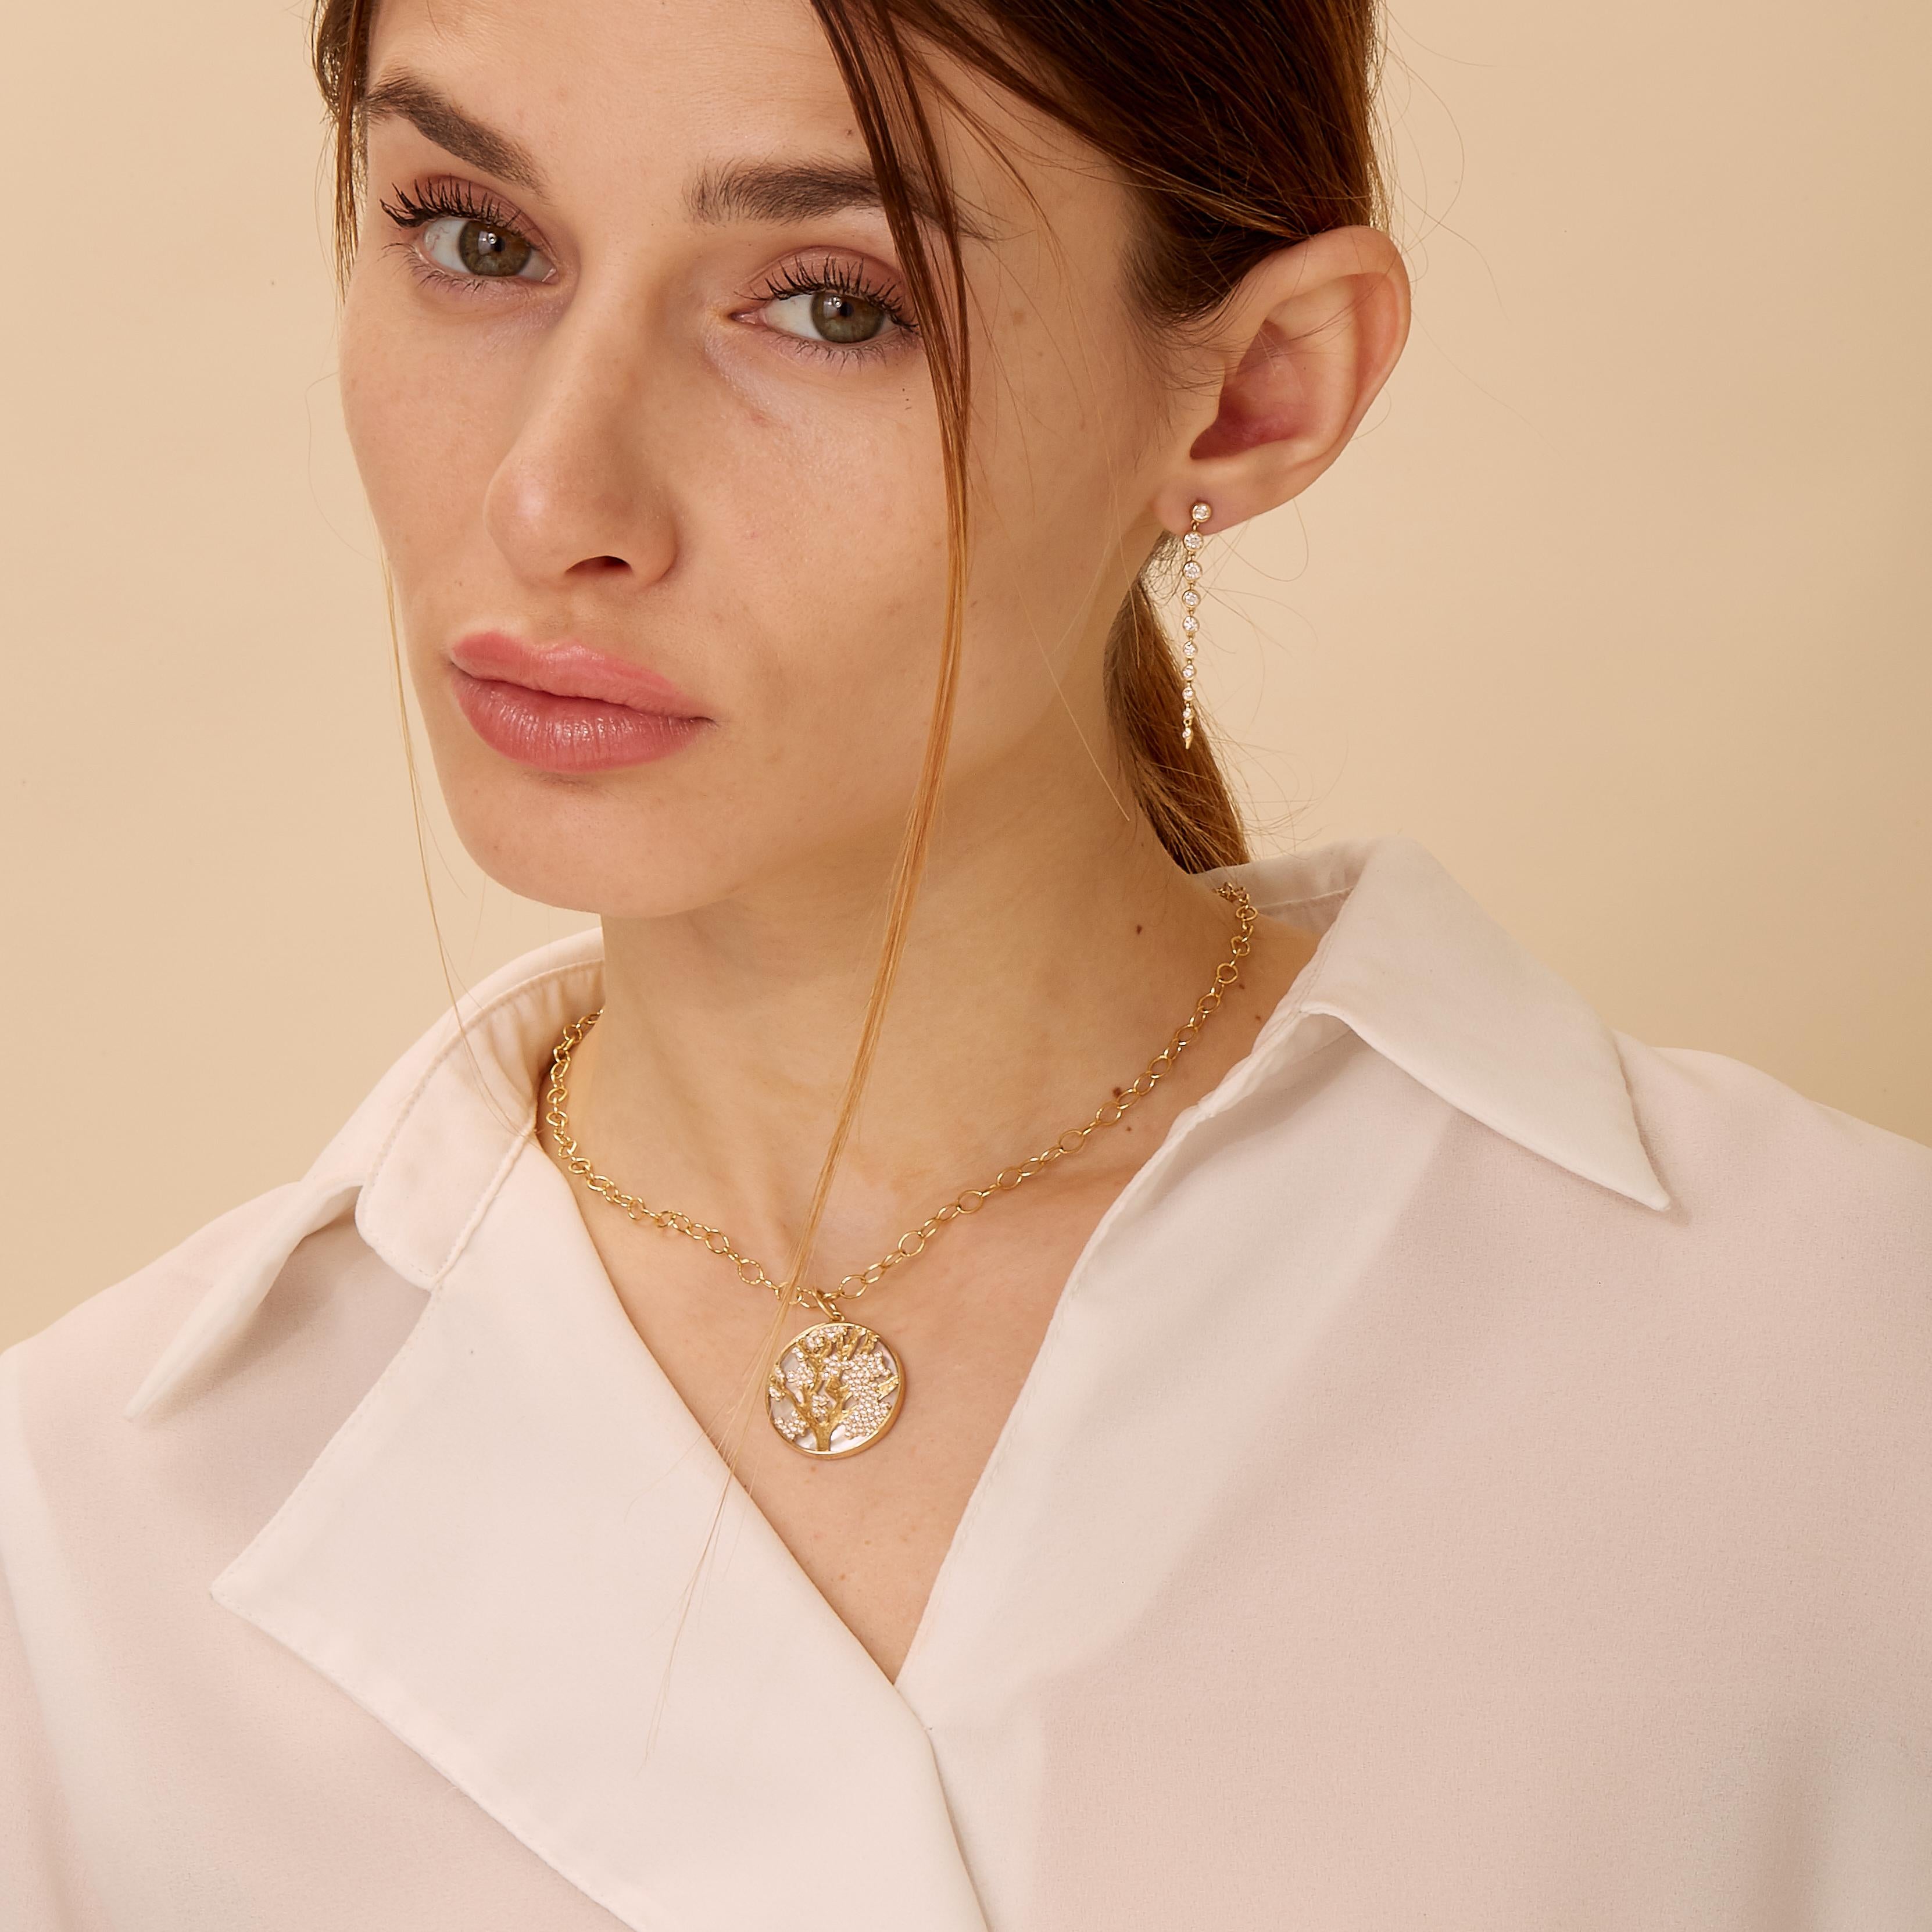 Created in 18 karat yellow gold 
Mother of Pearl 9 carats approx.
Diamonds 0.45 carat approx.
Cherry blossoms
Chain sold separately
Limited Edition

Fashioned in a luxurious 18-karat yellow gold, this exquisite limited-edition necklace renders an